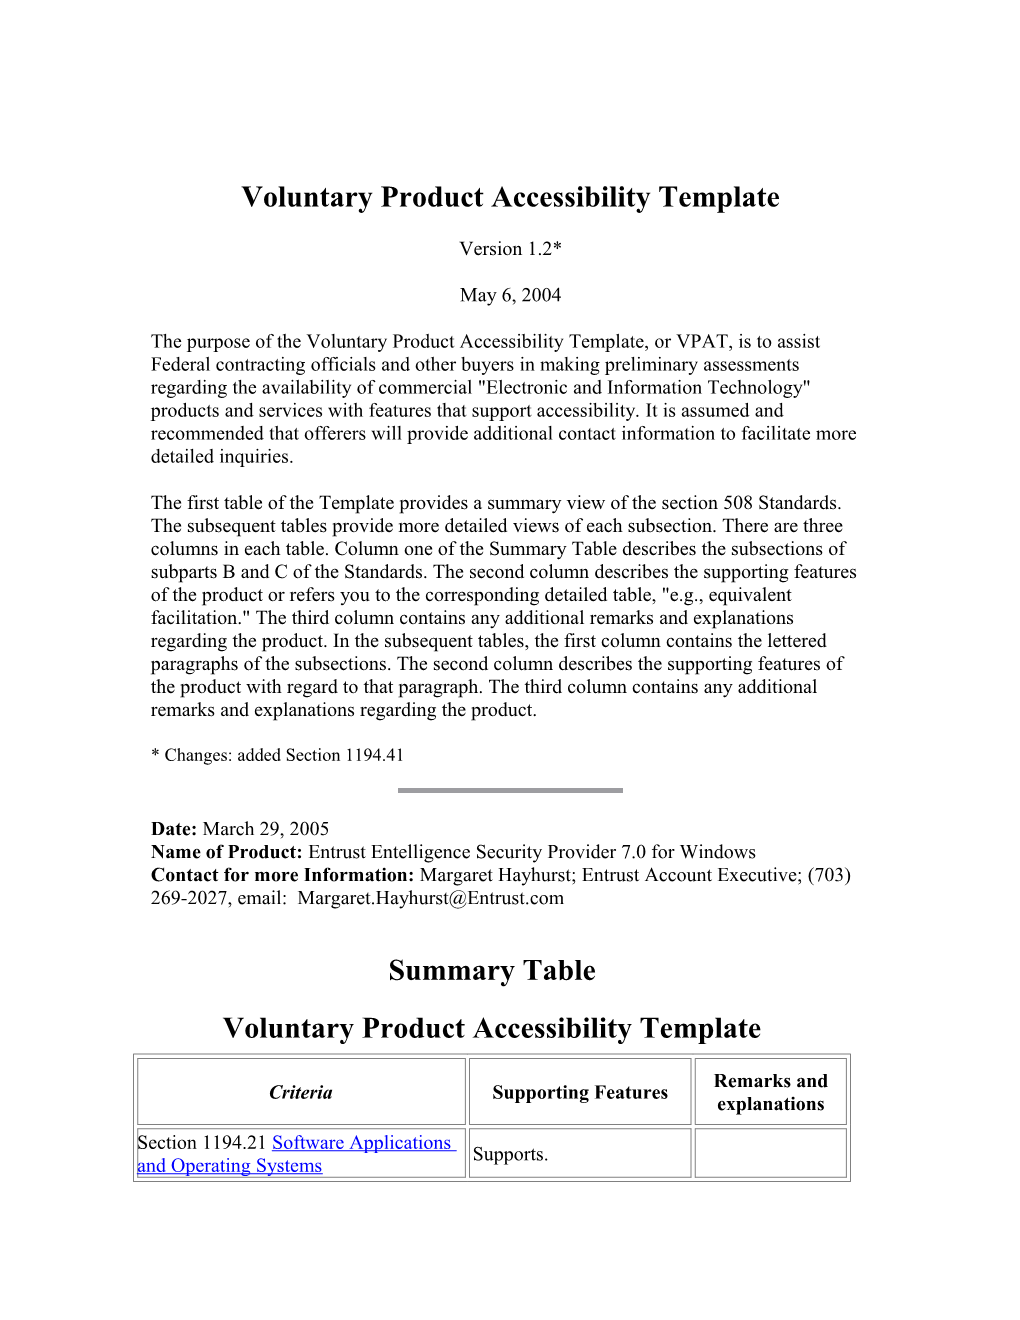 ITI: Voluntary Product Accessibility Template s1